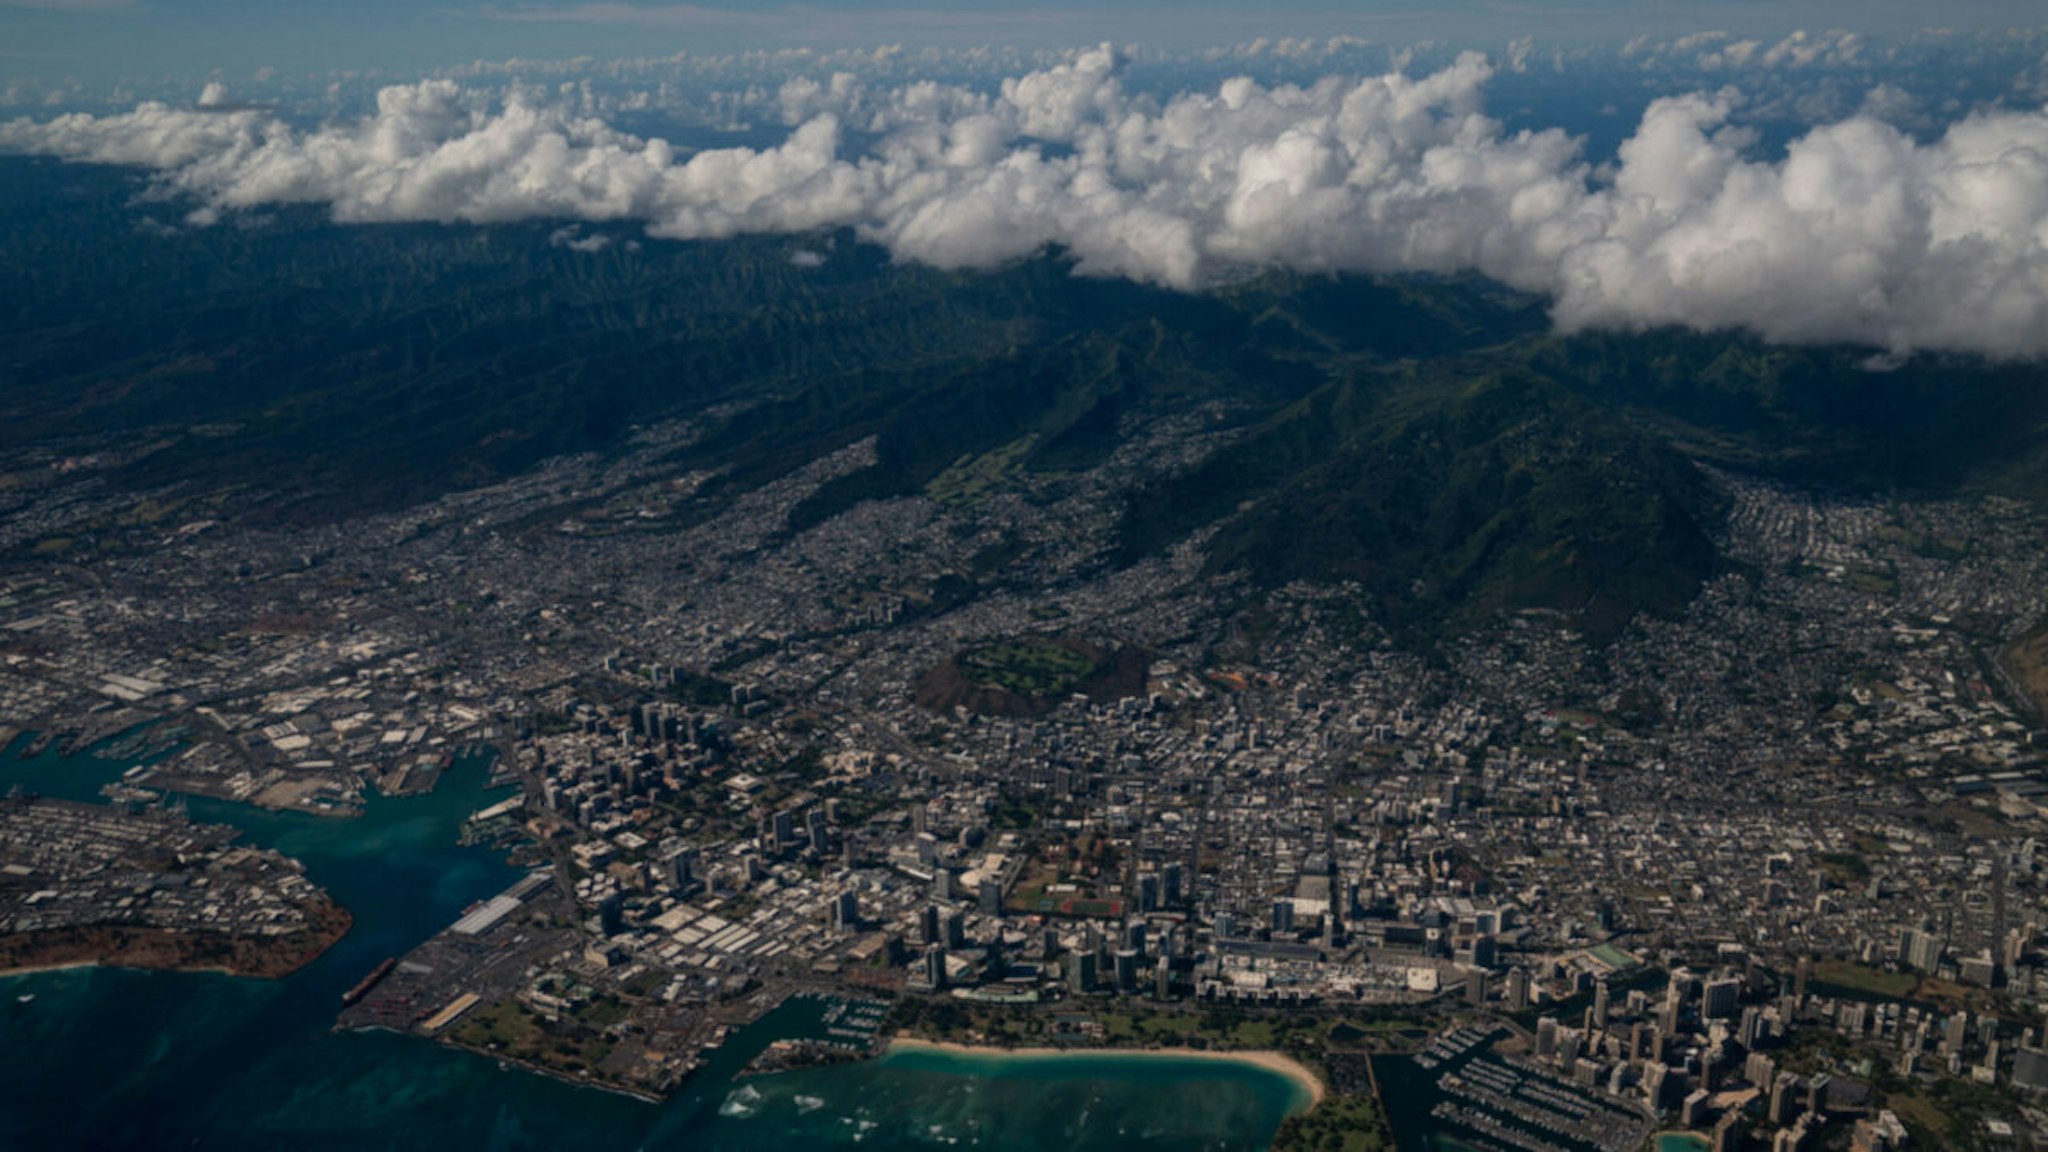 An aerial view of Ala Moana Beach Pack and Honolulu from a United Airlines flight out of Los Angeles International Airport flying over the island of Oahu on approach to Daniel K. Inouye International Airport on Wednesday, June 23, 2021 in Honolulu, HI.